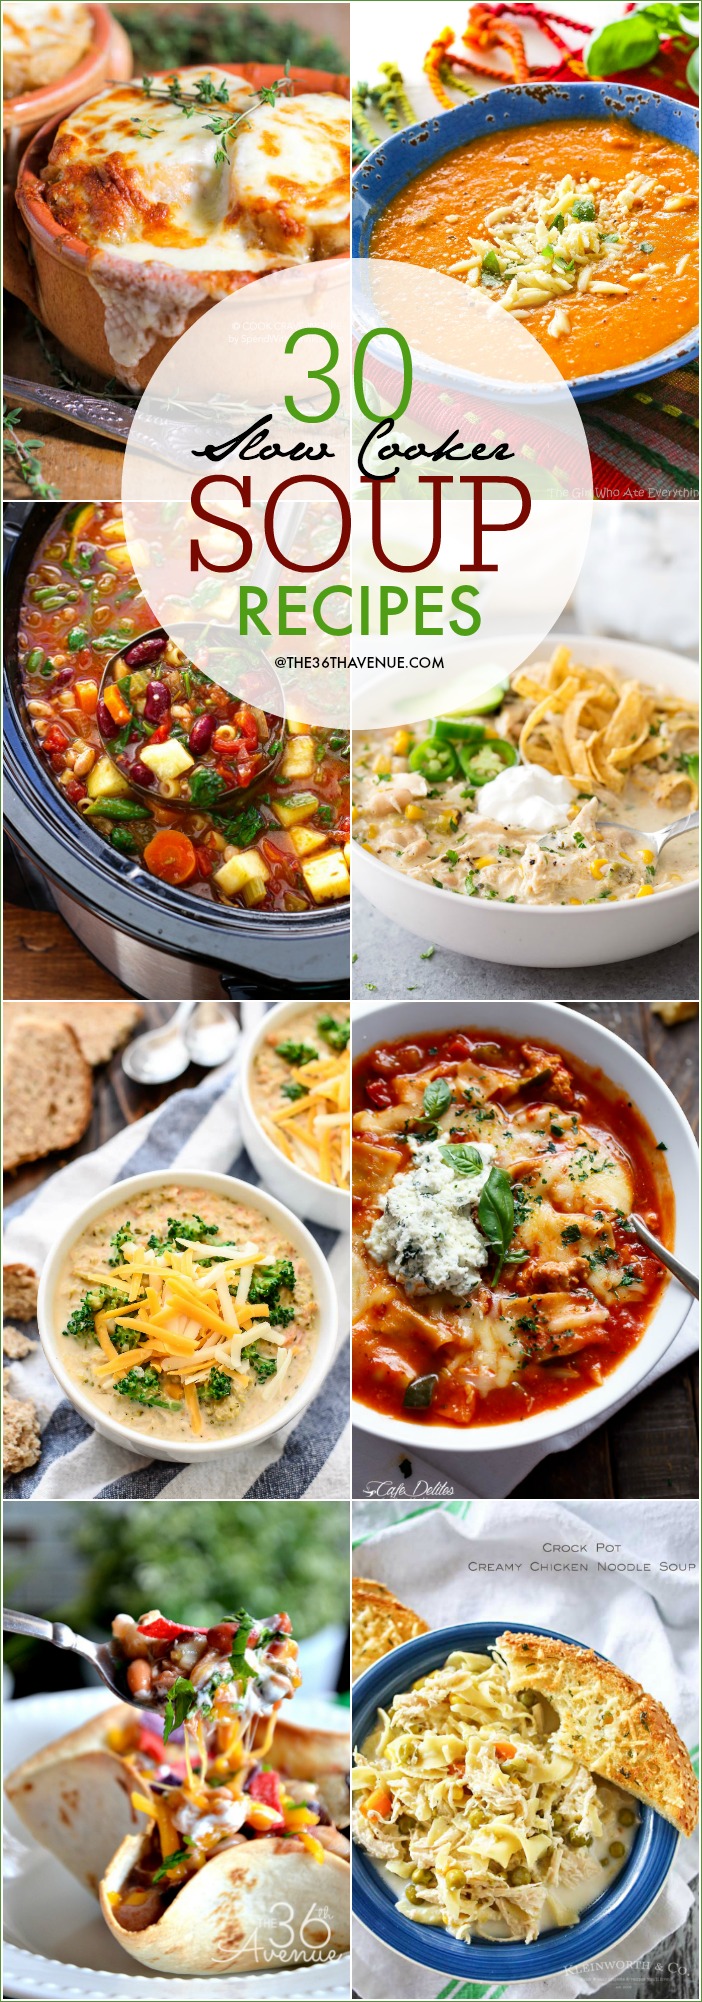 Slow Cooker Soup Recipes - Enjoy these easy and delicious soup recipes at The36thAvenue. Pin it now and make them later. 